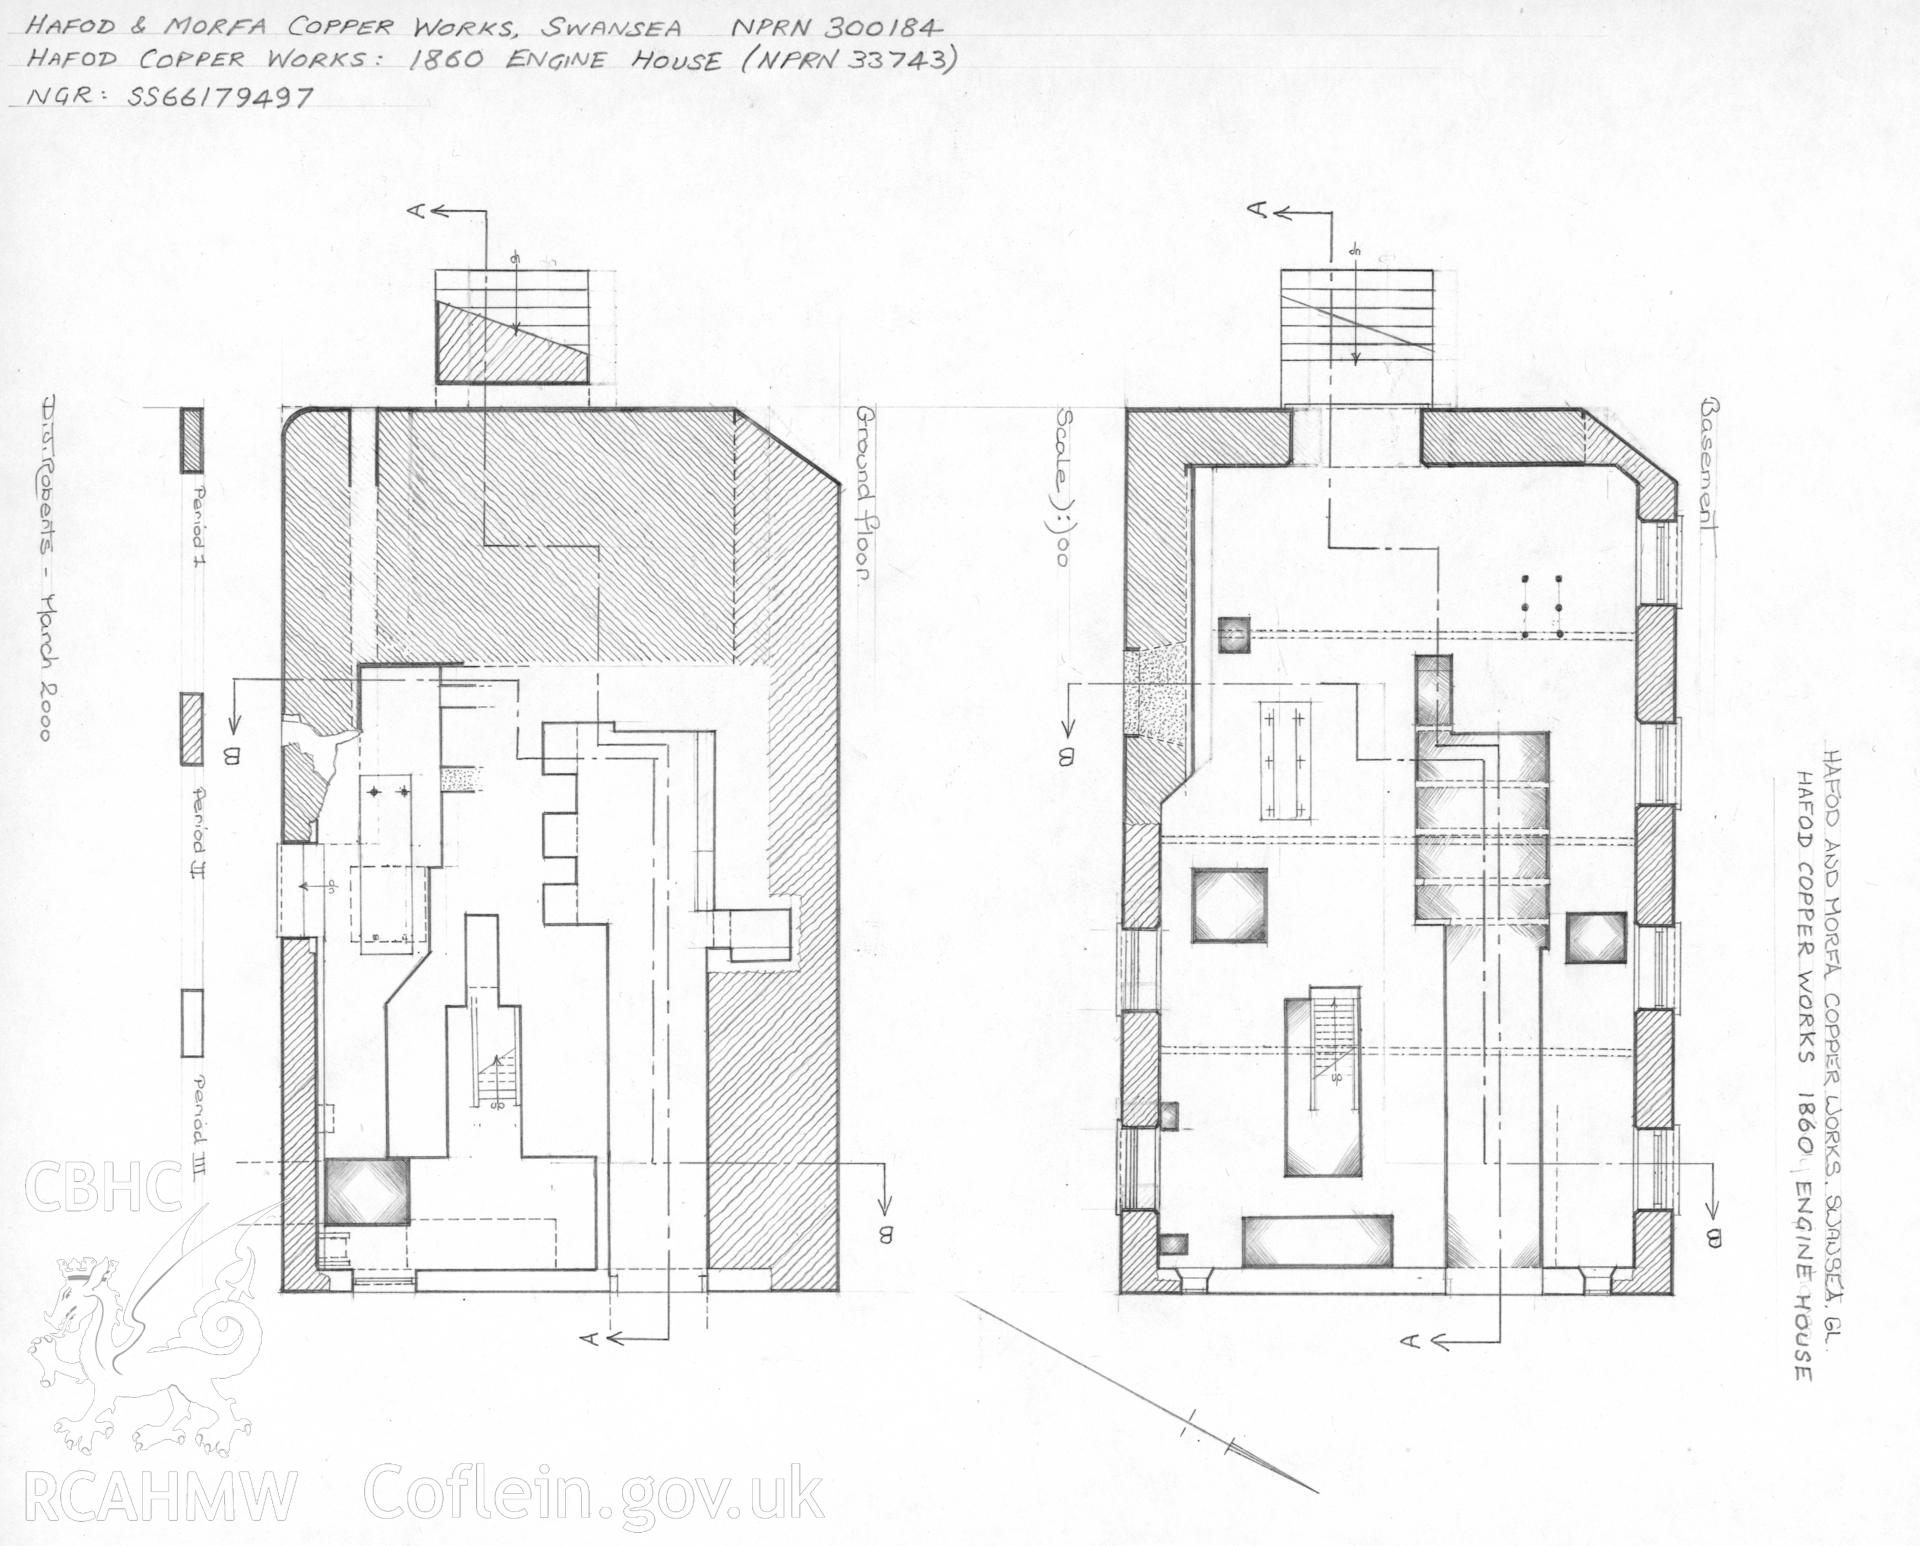 Measured survey comprising ground floor and basement plansof the 1860 engine house at Hafod and Morfa Copperworks, drawn by Dylan Roberts, March 2000.